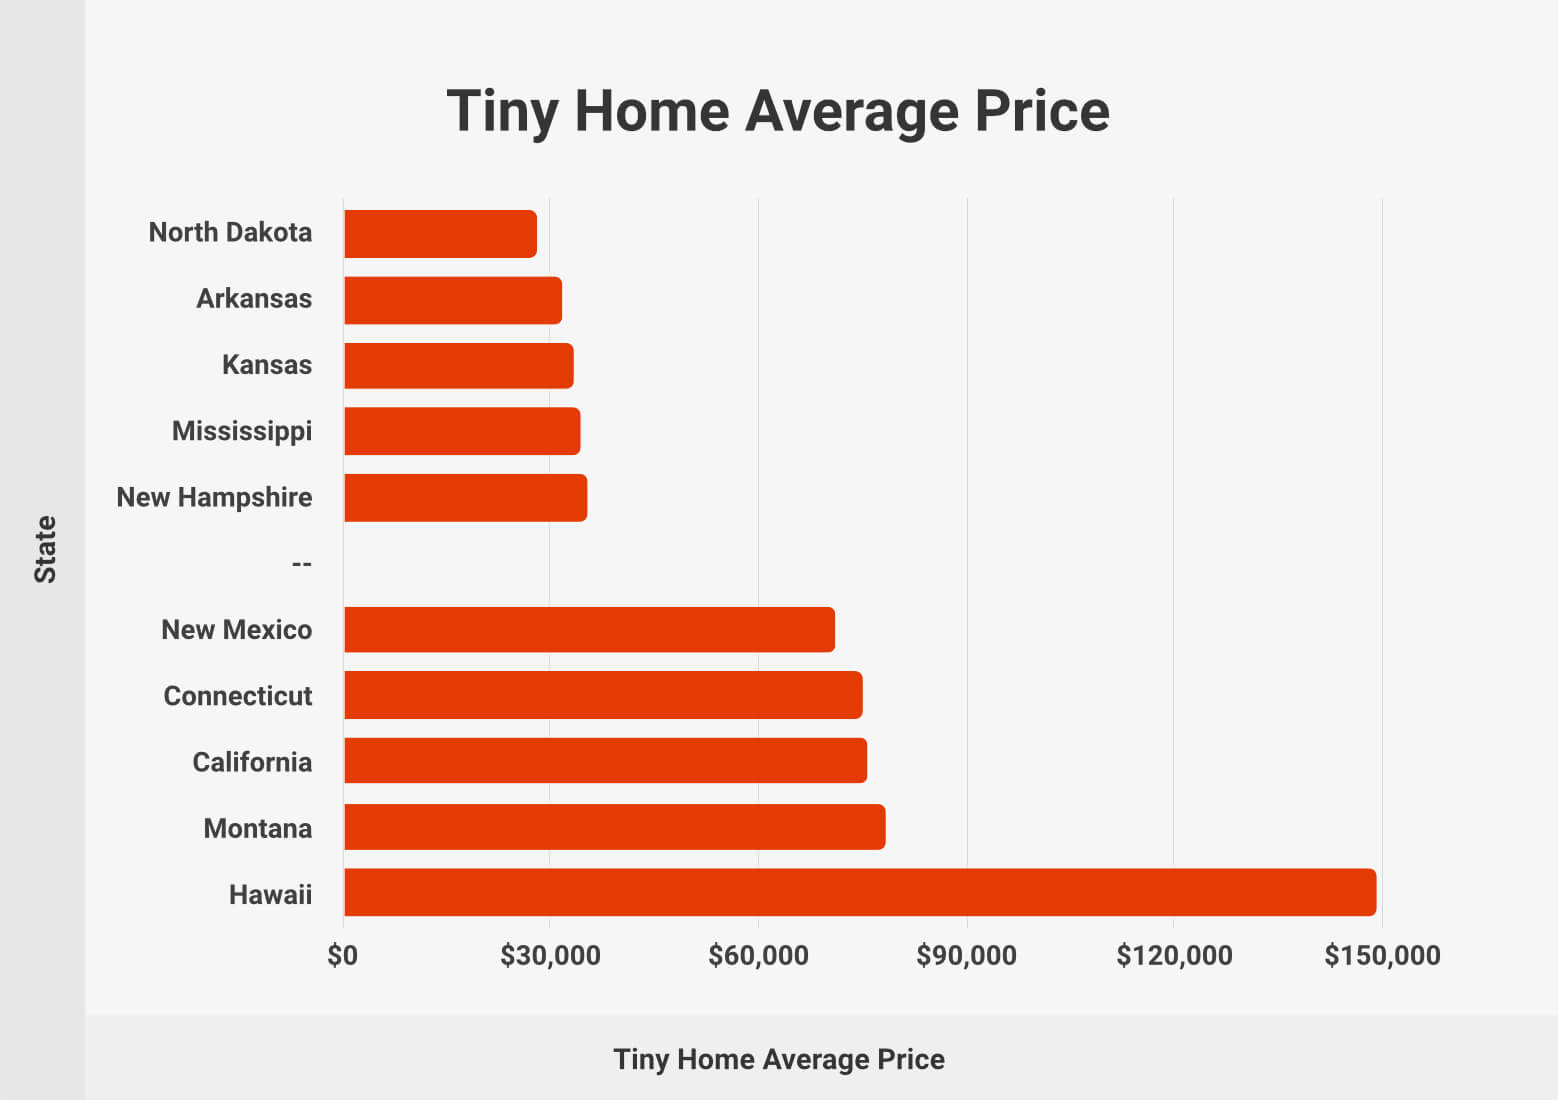 Tiny Home Average Price Highest and Lowest